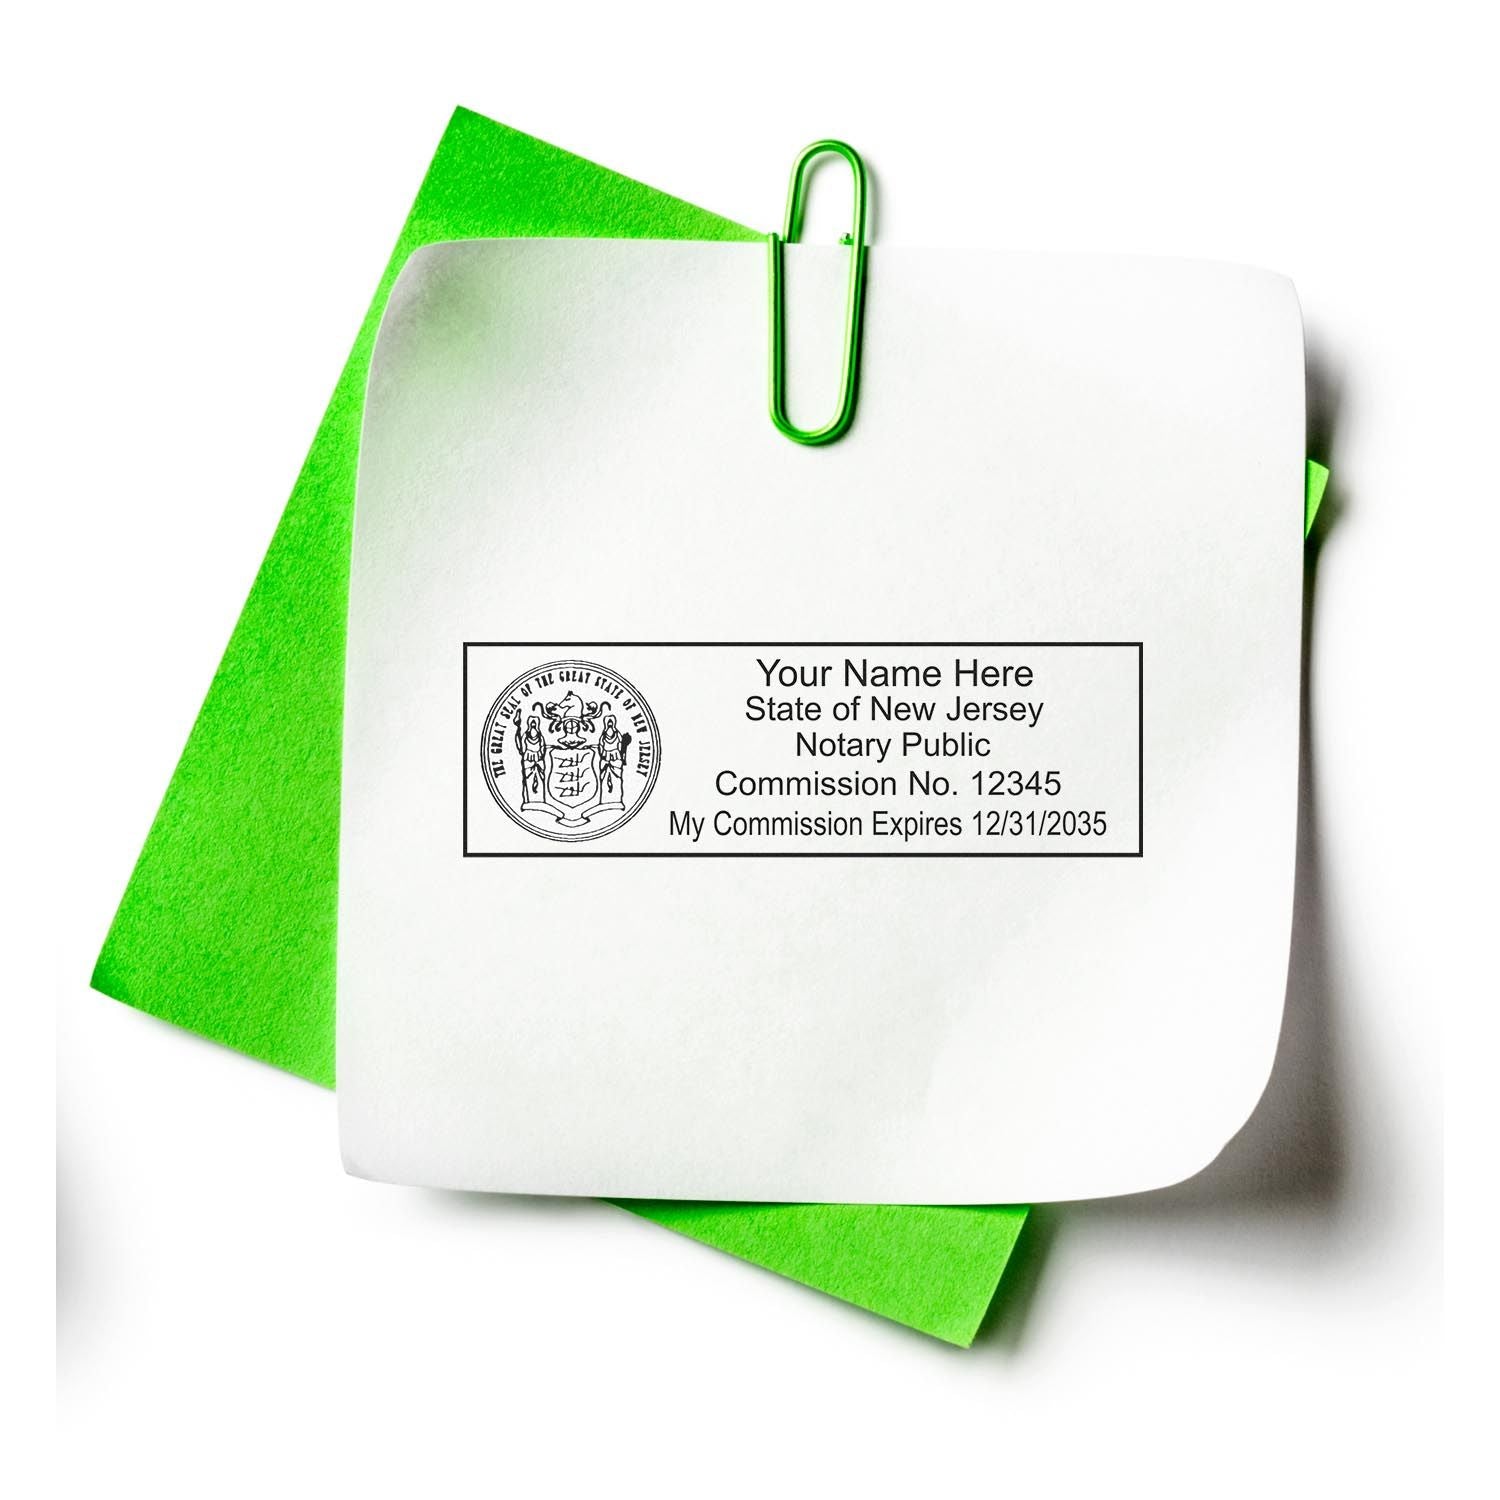 New Jersey Notary Supplies Blog Post Feature Image